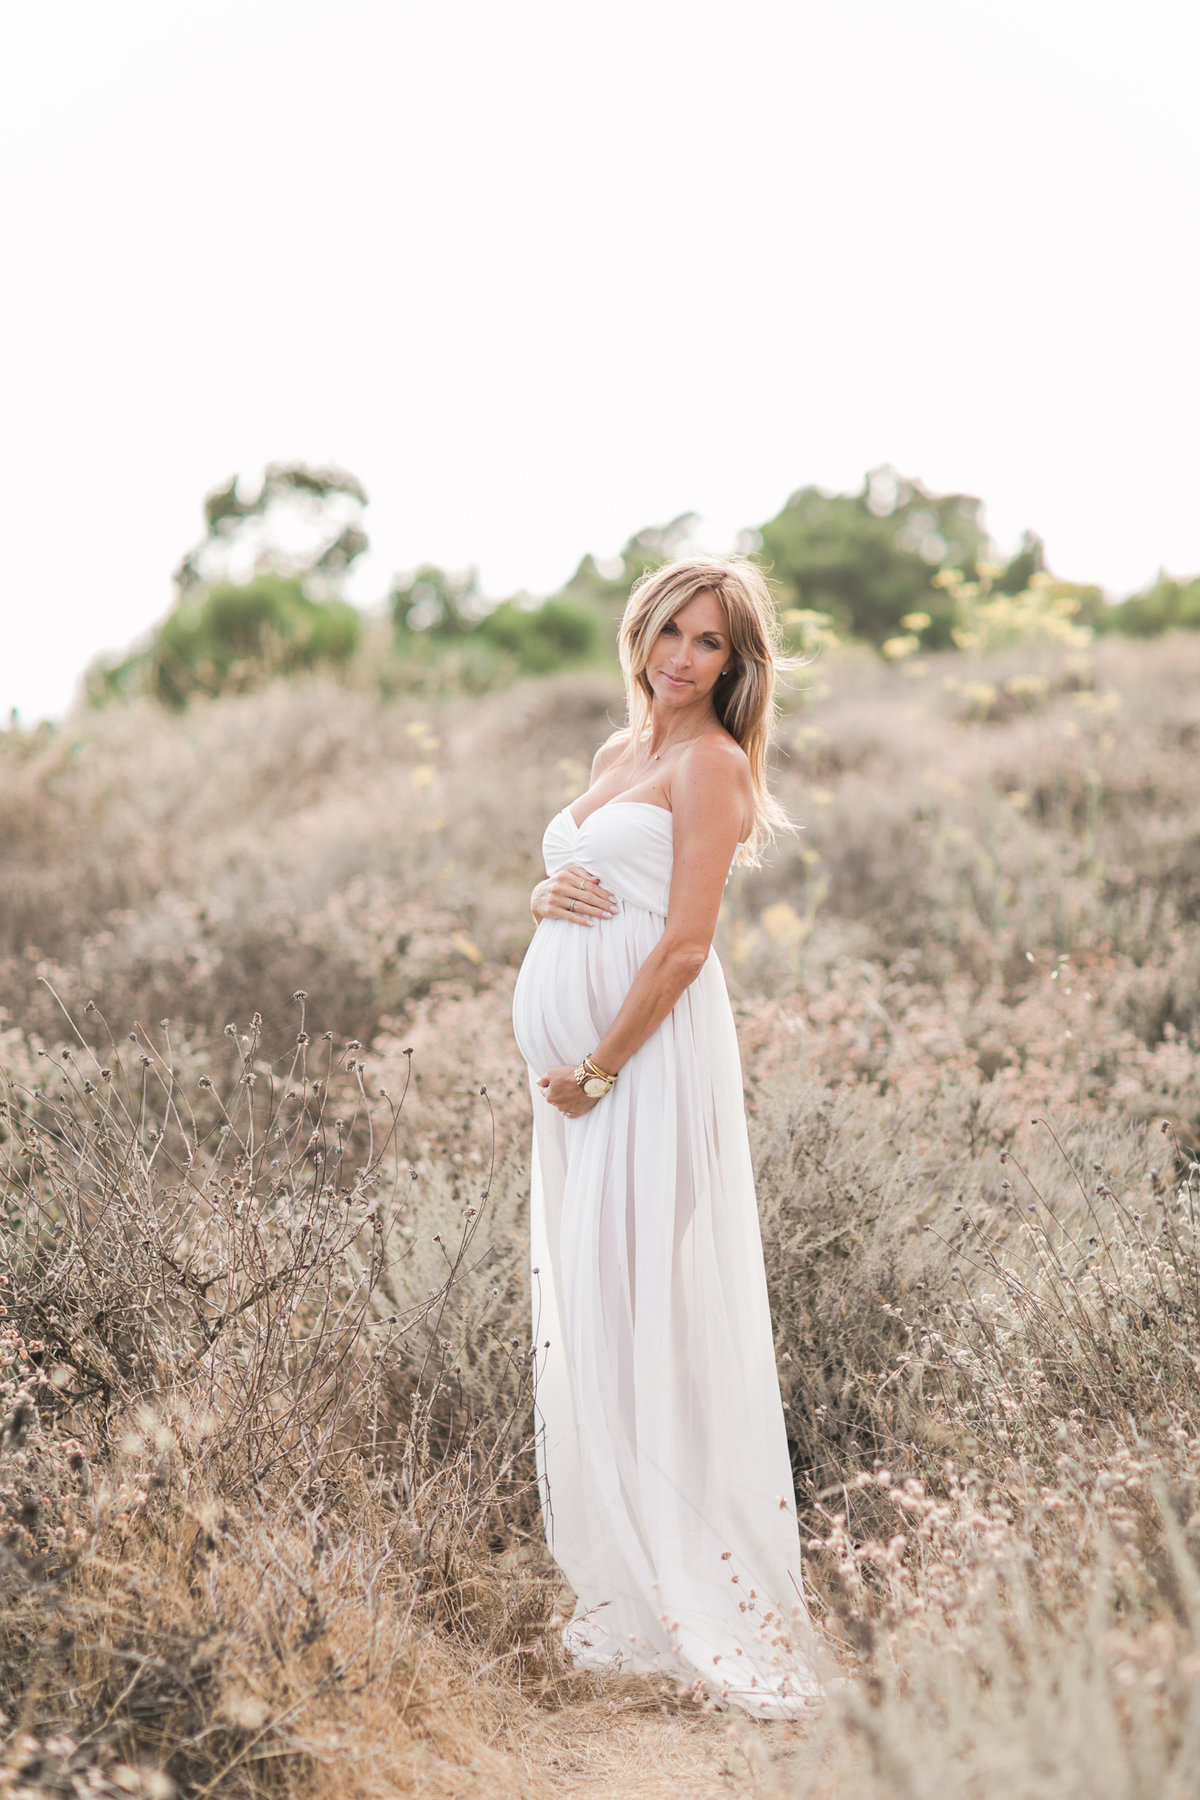 Southern California Coastline Maternity Session_Valorie Darling Photography-5812